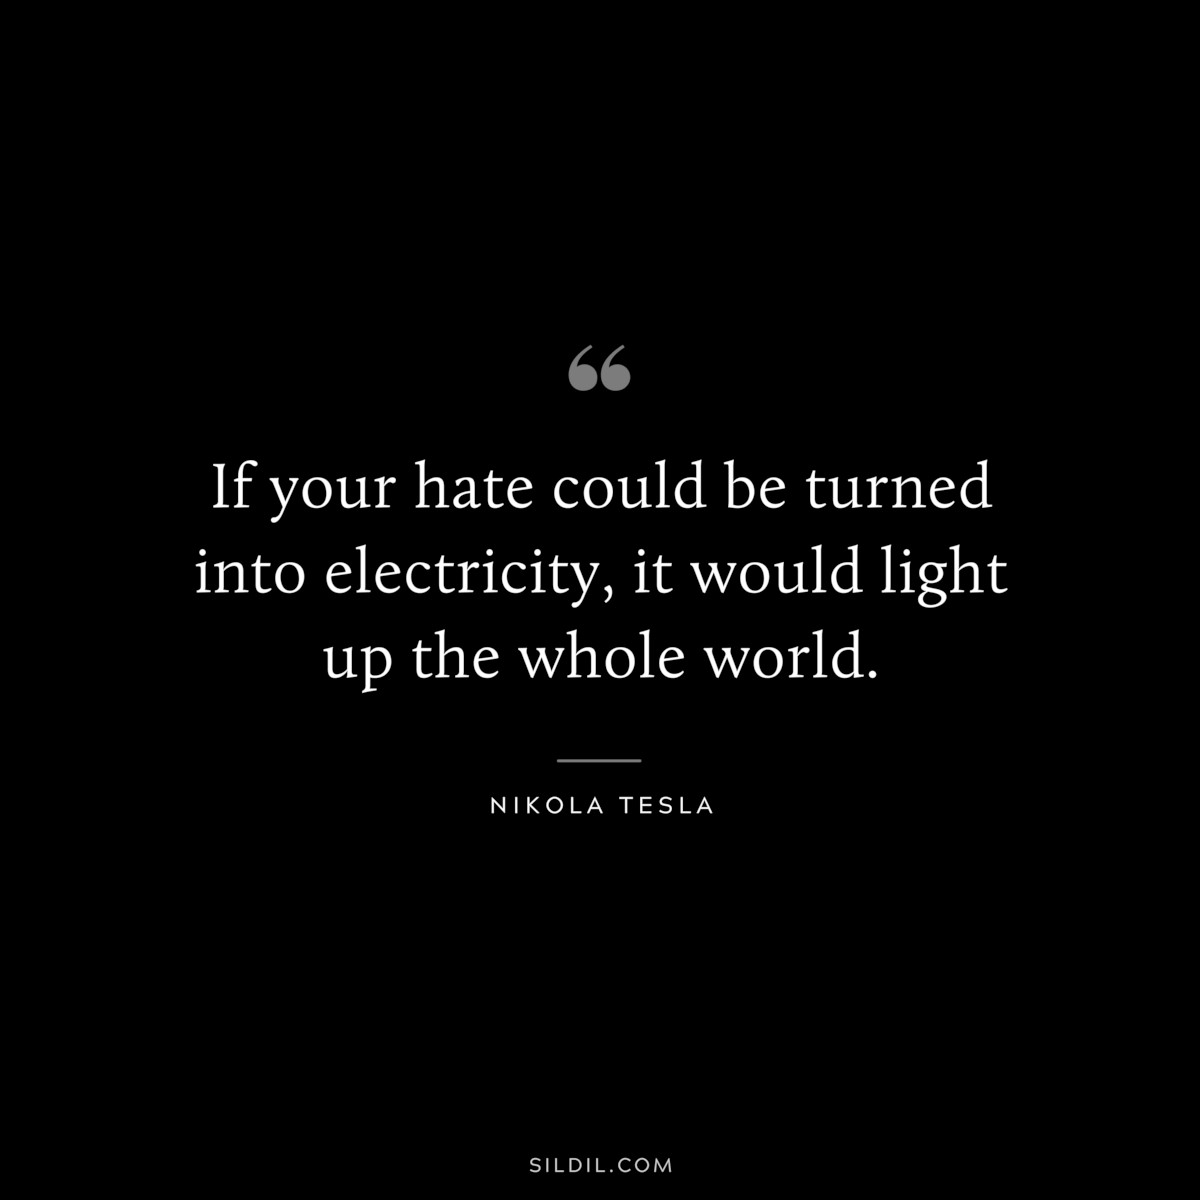 If your hate could be turned into electricity, it would light up the whole world. ― Nikola Tesla